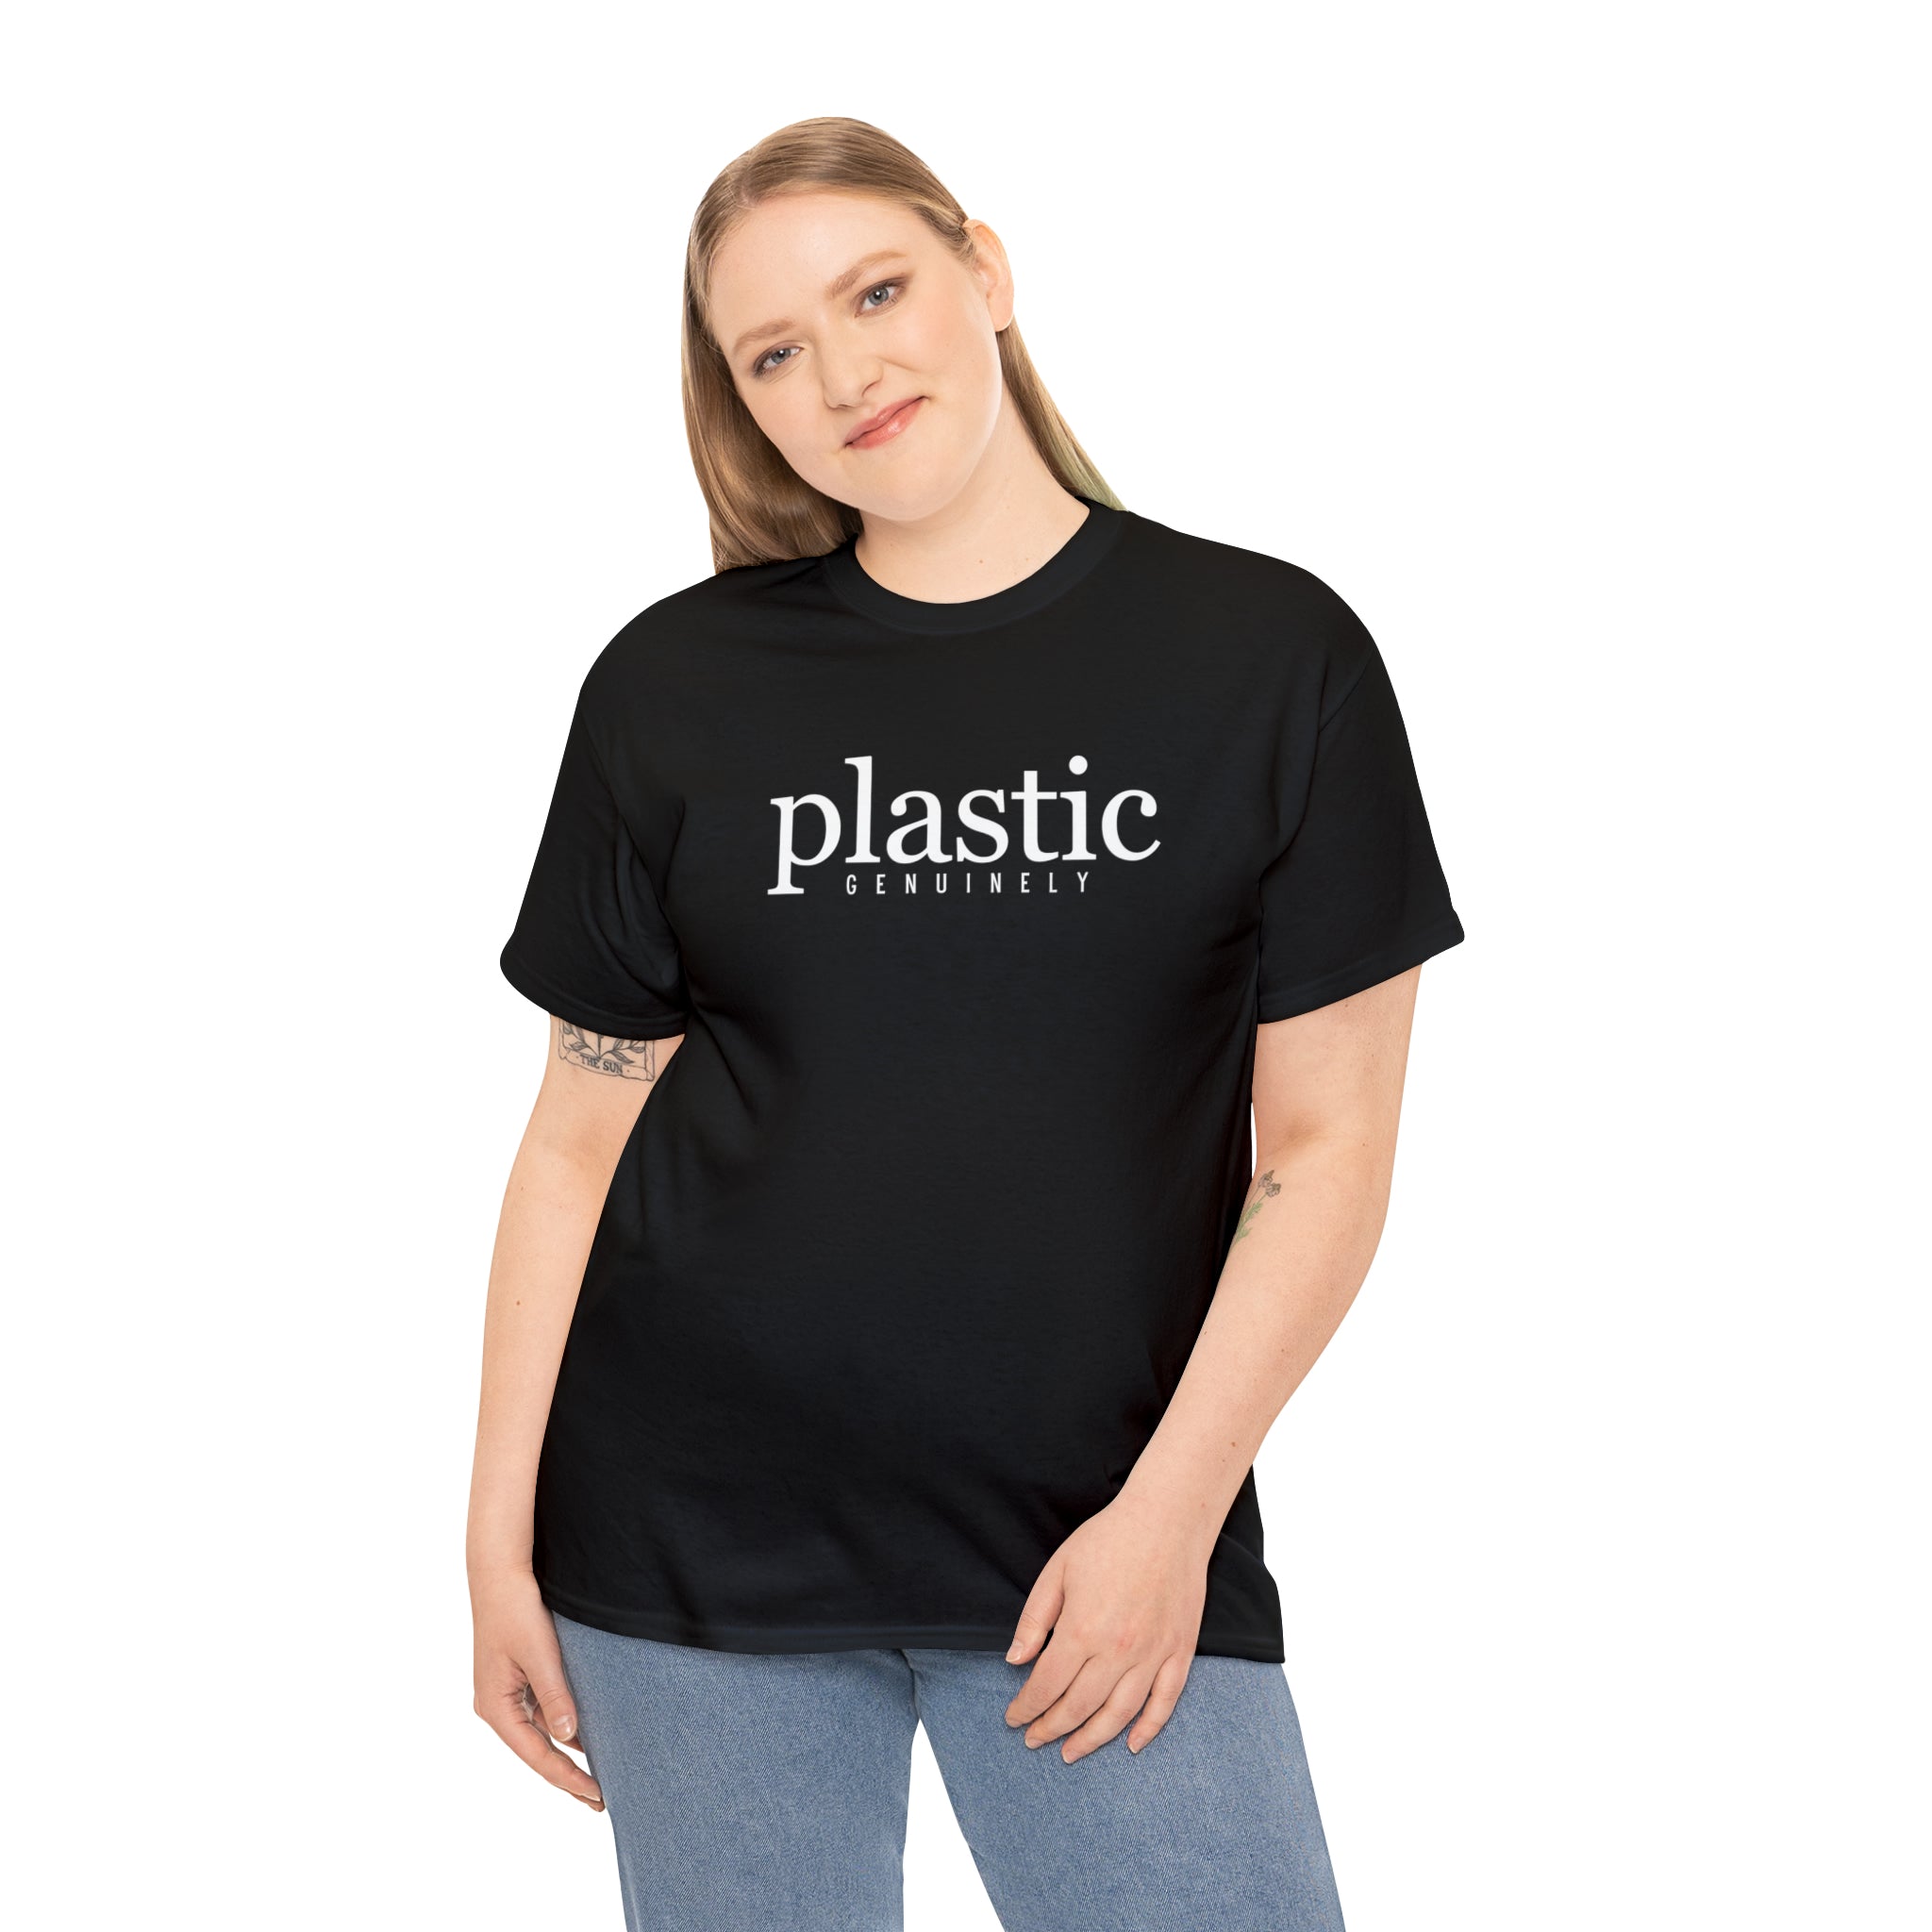  Genuinely PLASTIC Relaxed-Fit Cotton T-Shirt, Female Empowerment Shirt, Cute Graphic T-shirt T-Shirt